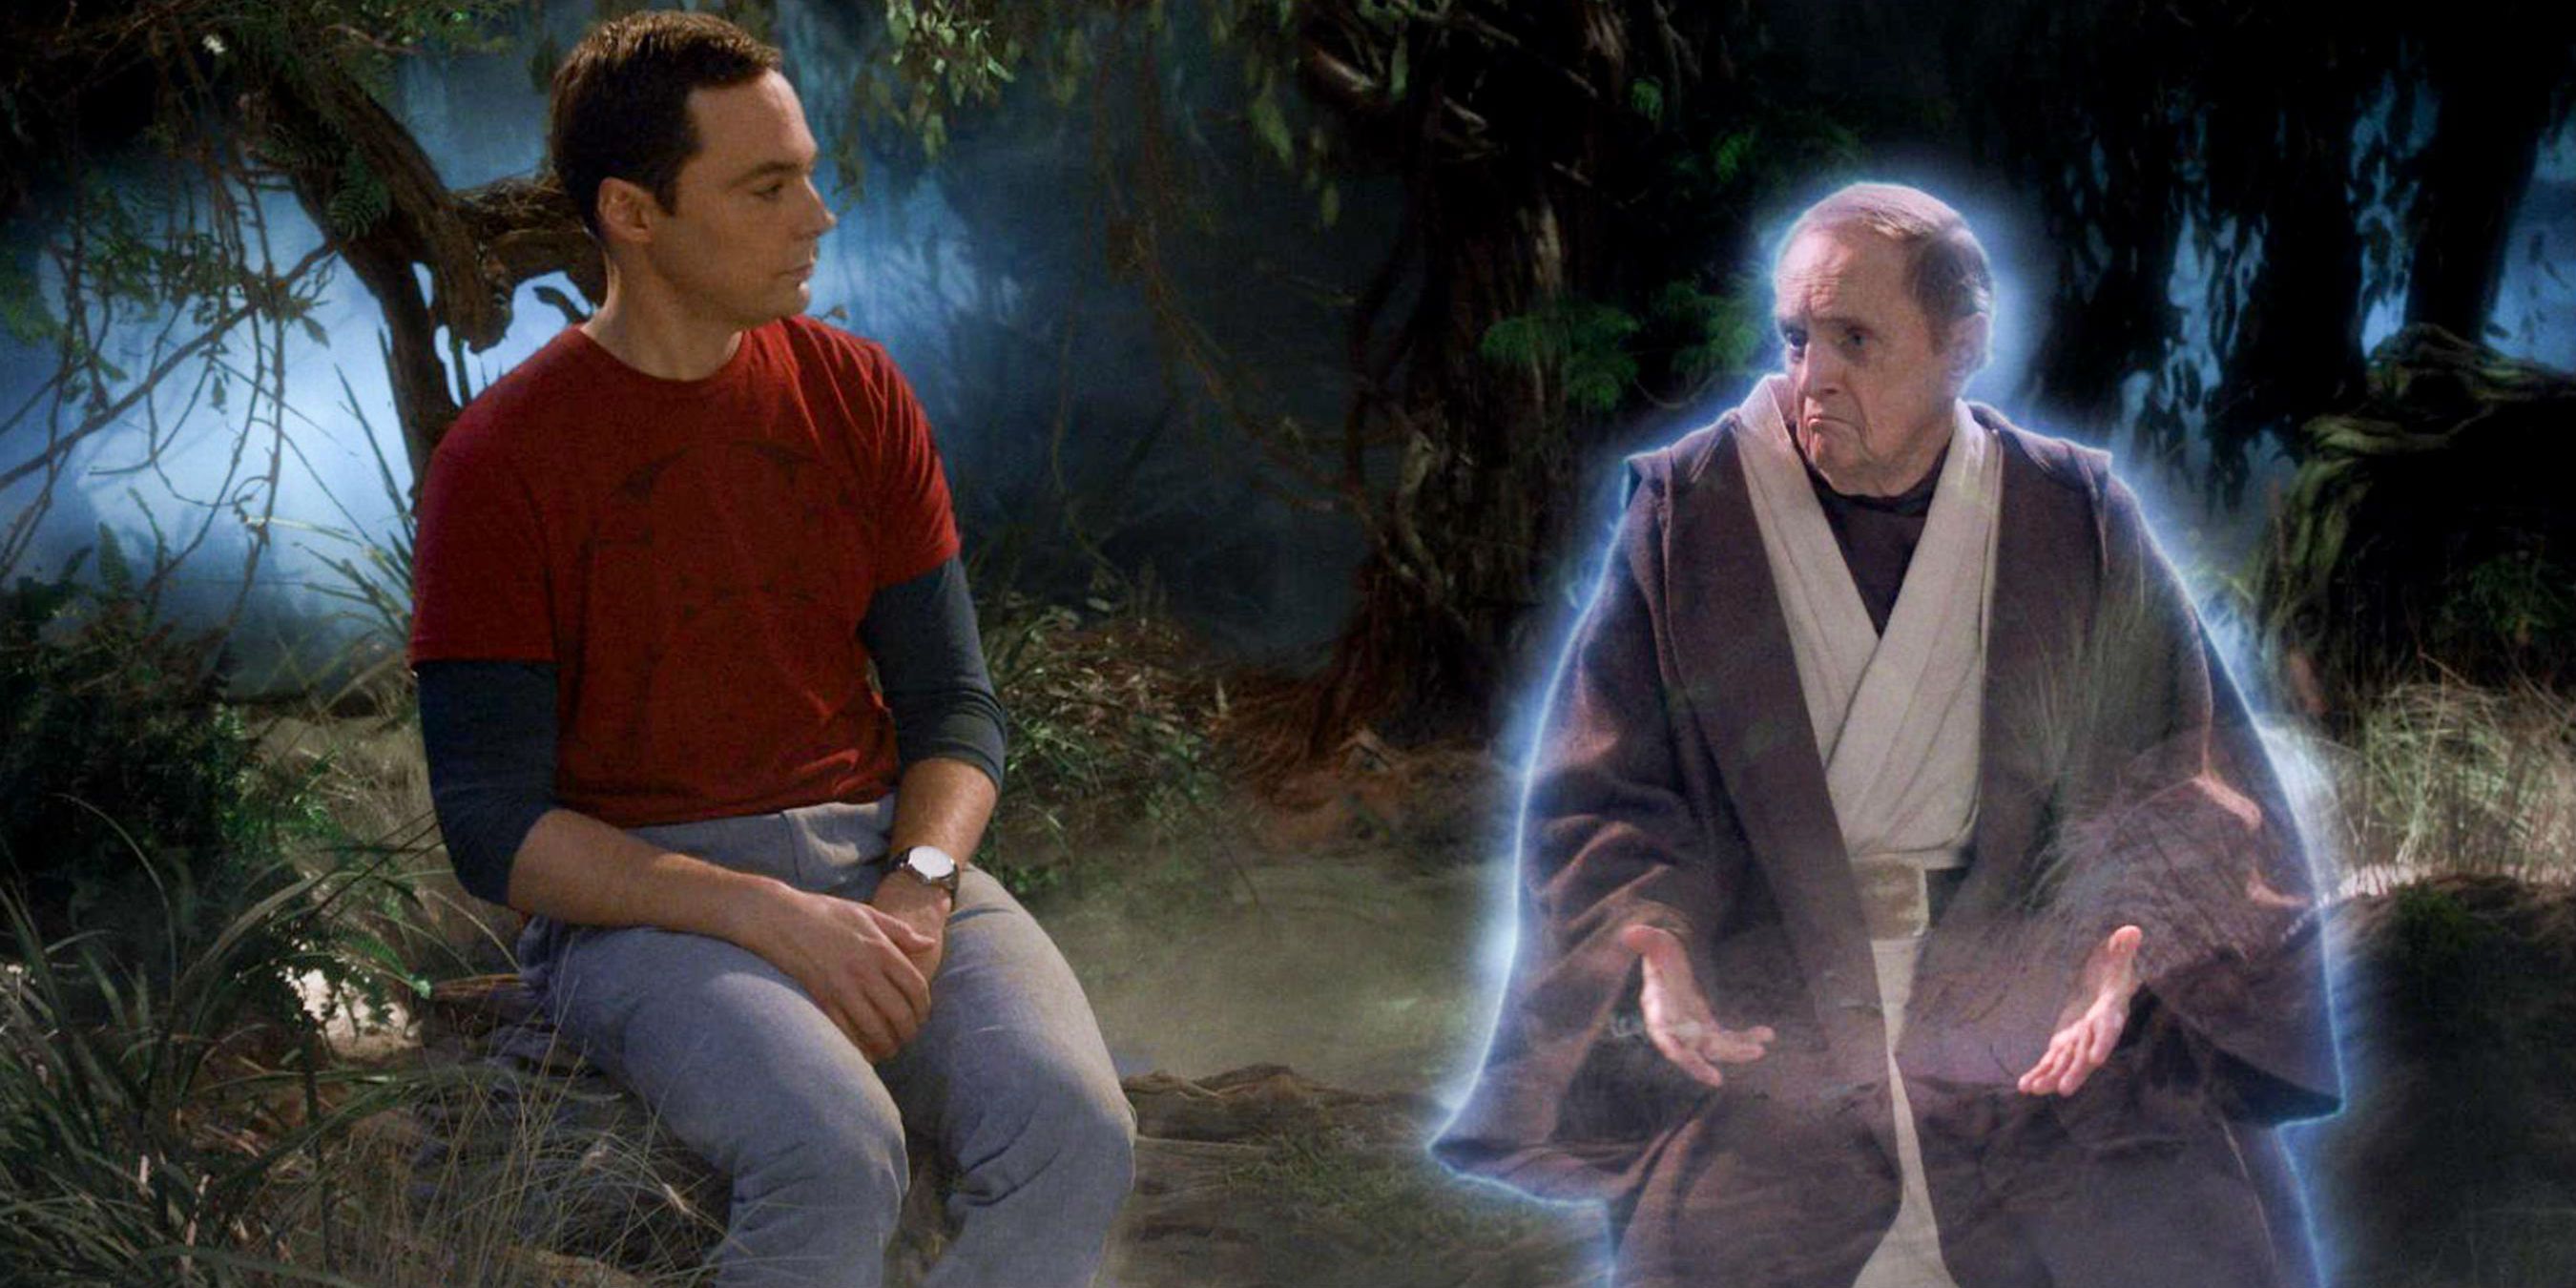 Sheldon and Professor Proton talking in a dream in The Big Bang Theory